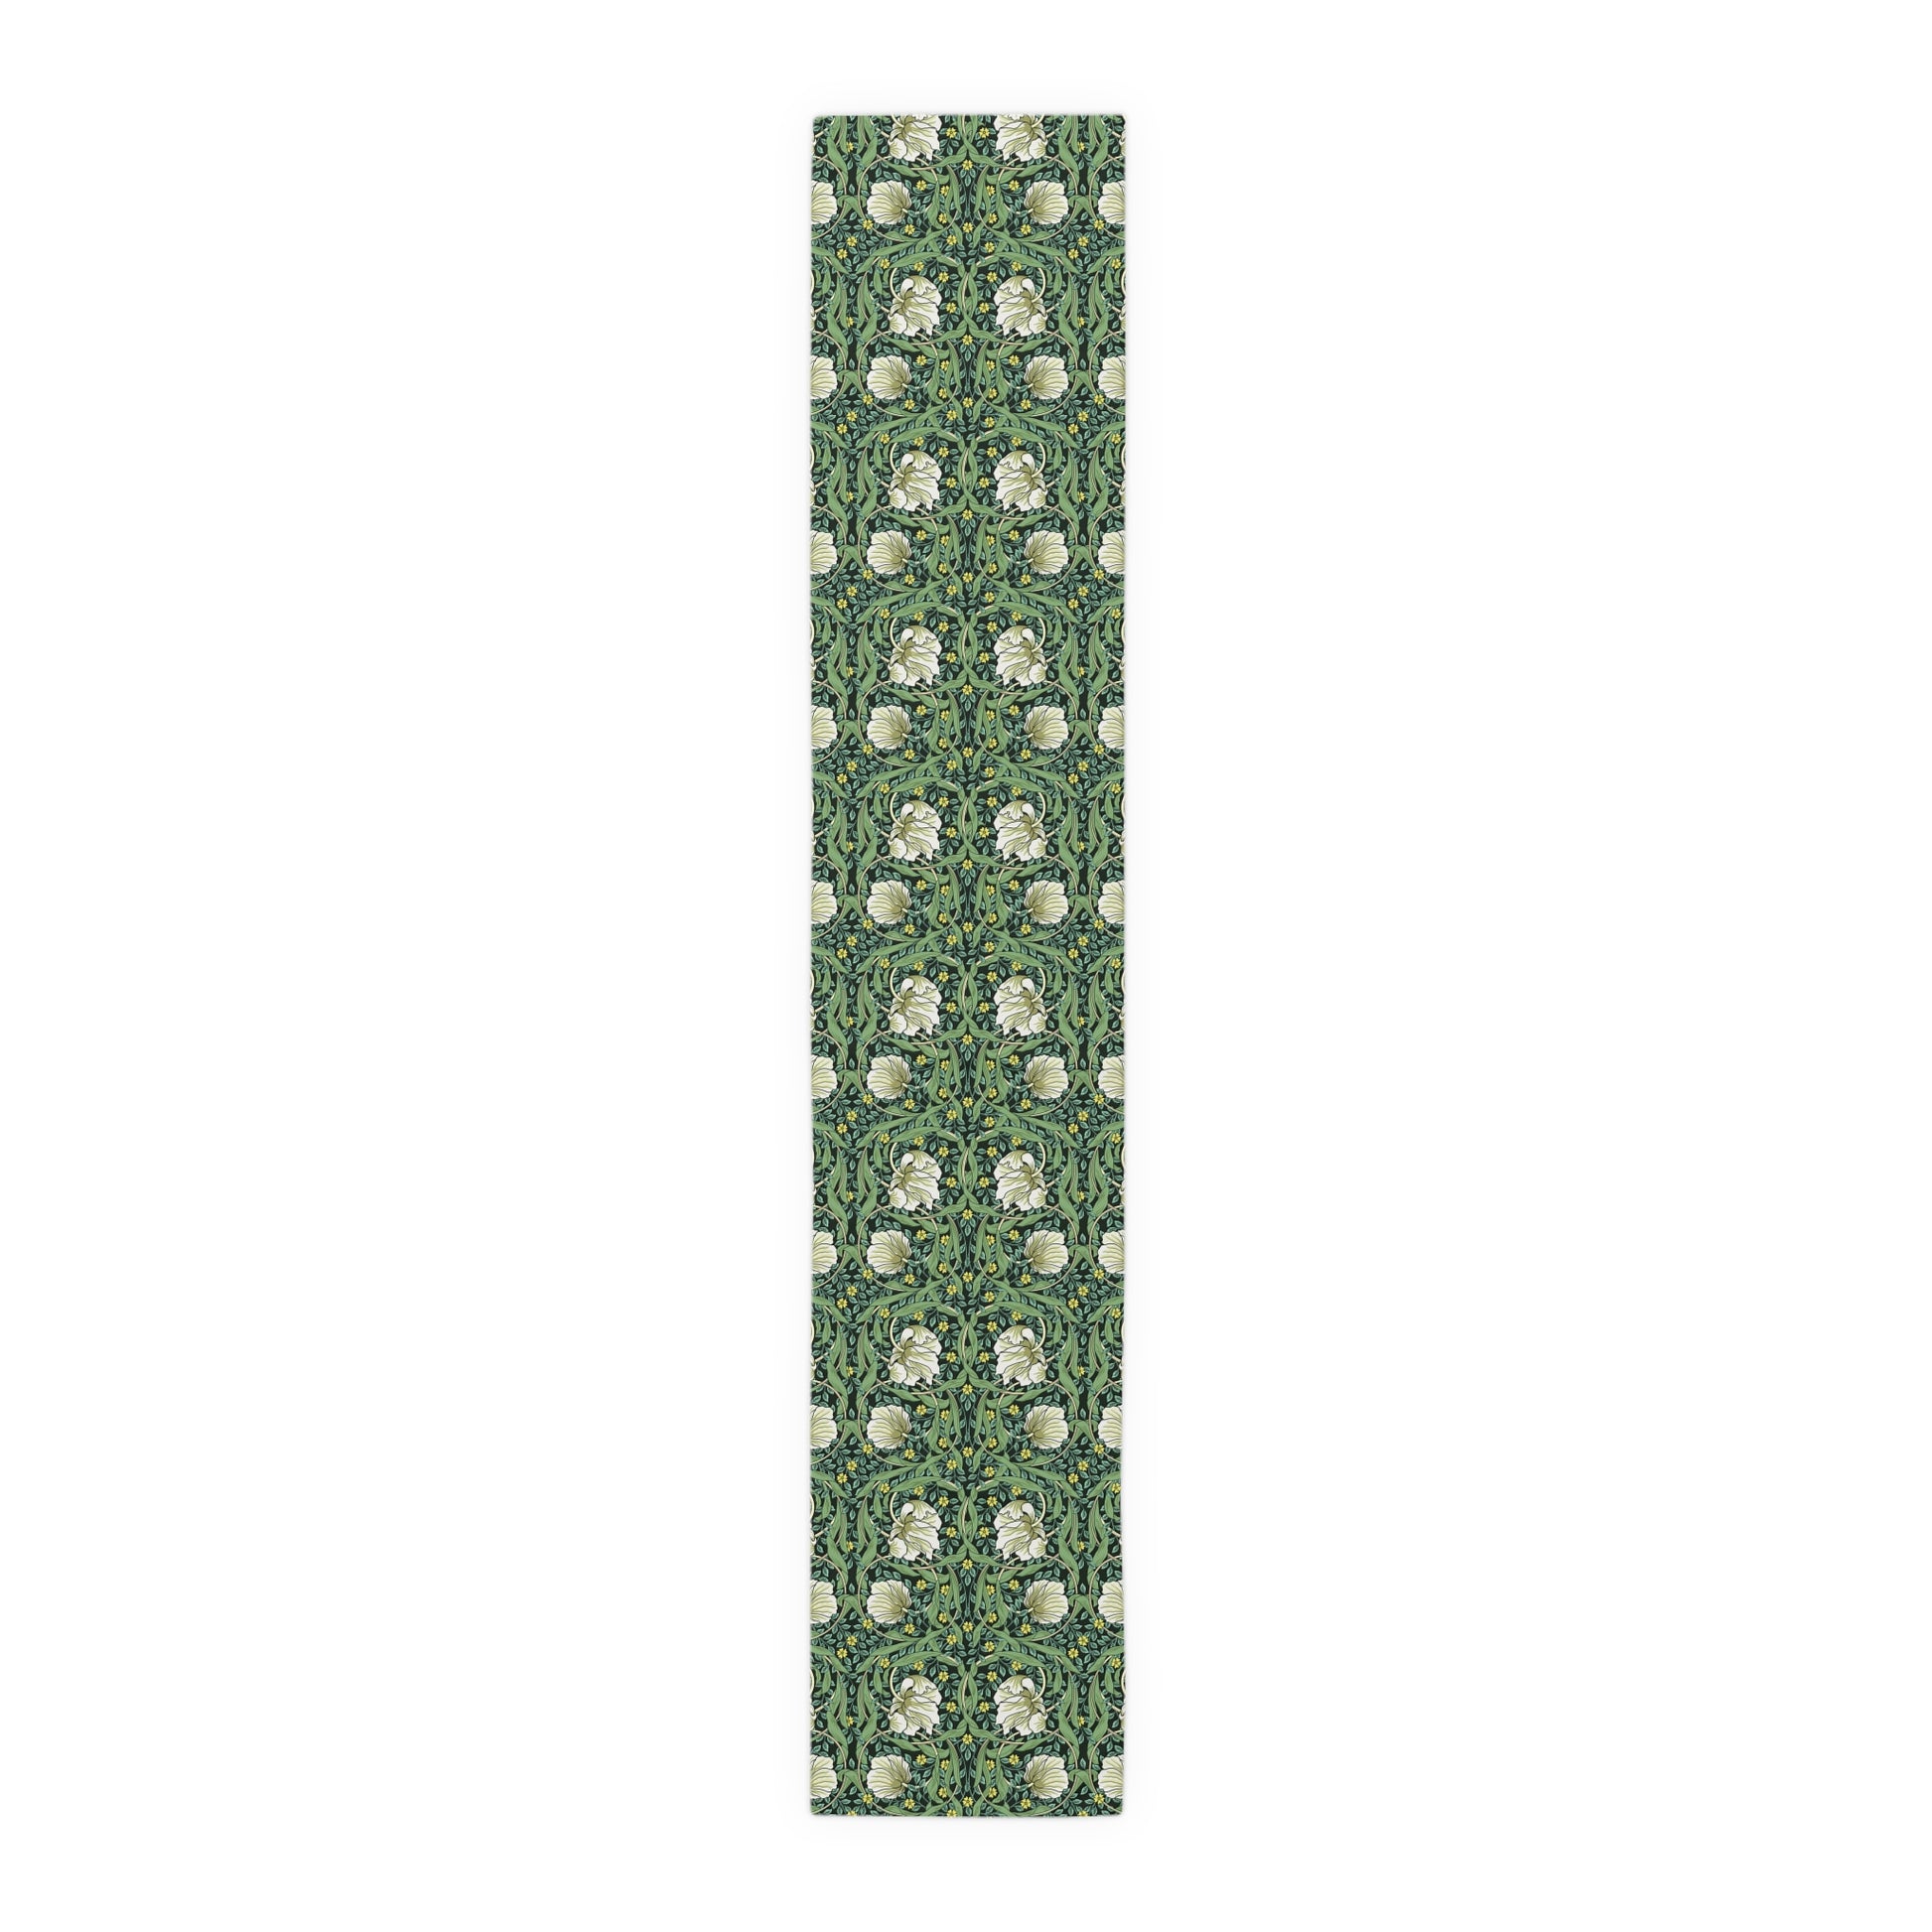 william-morris-co-table-runner-pimpernel-collection-green-18